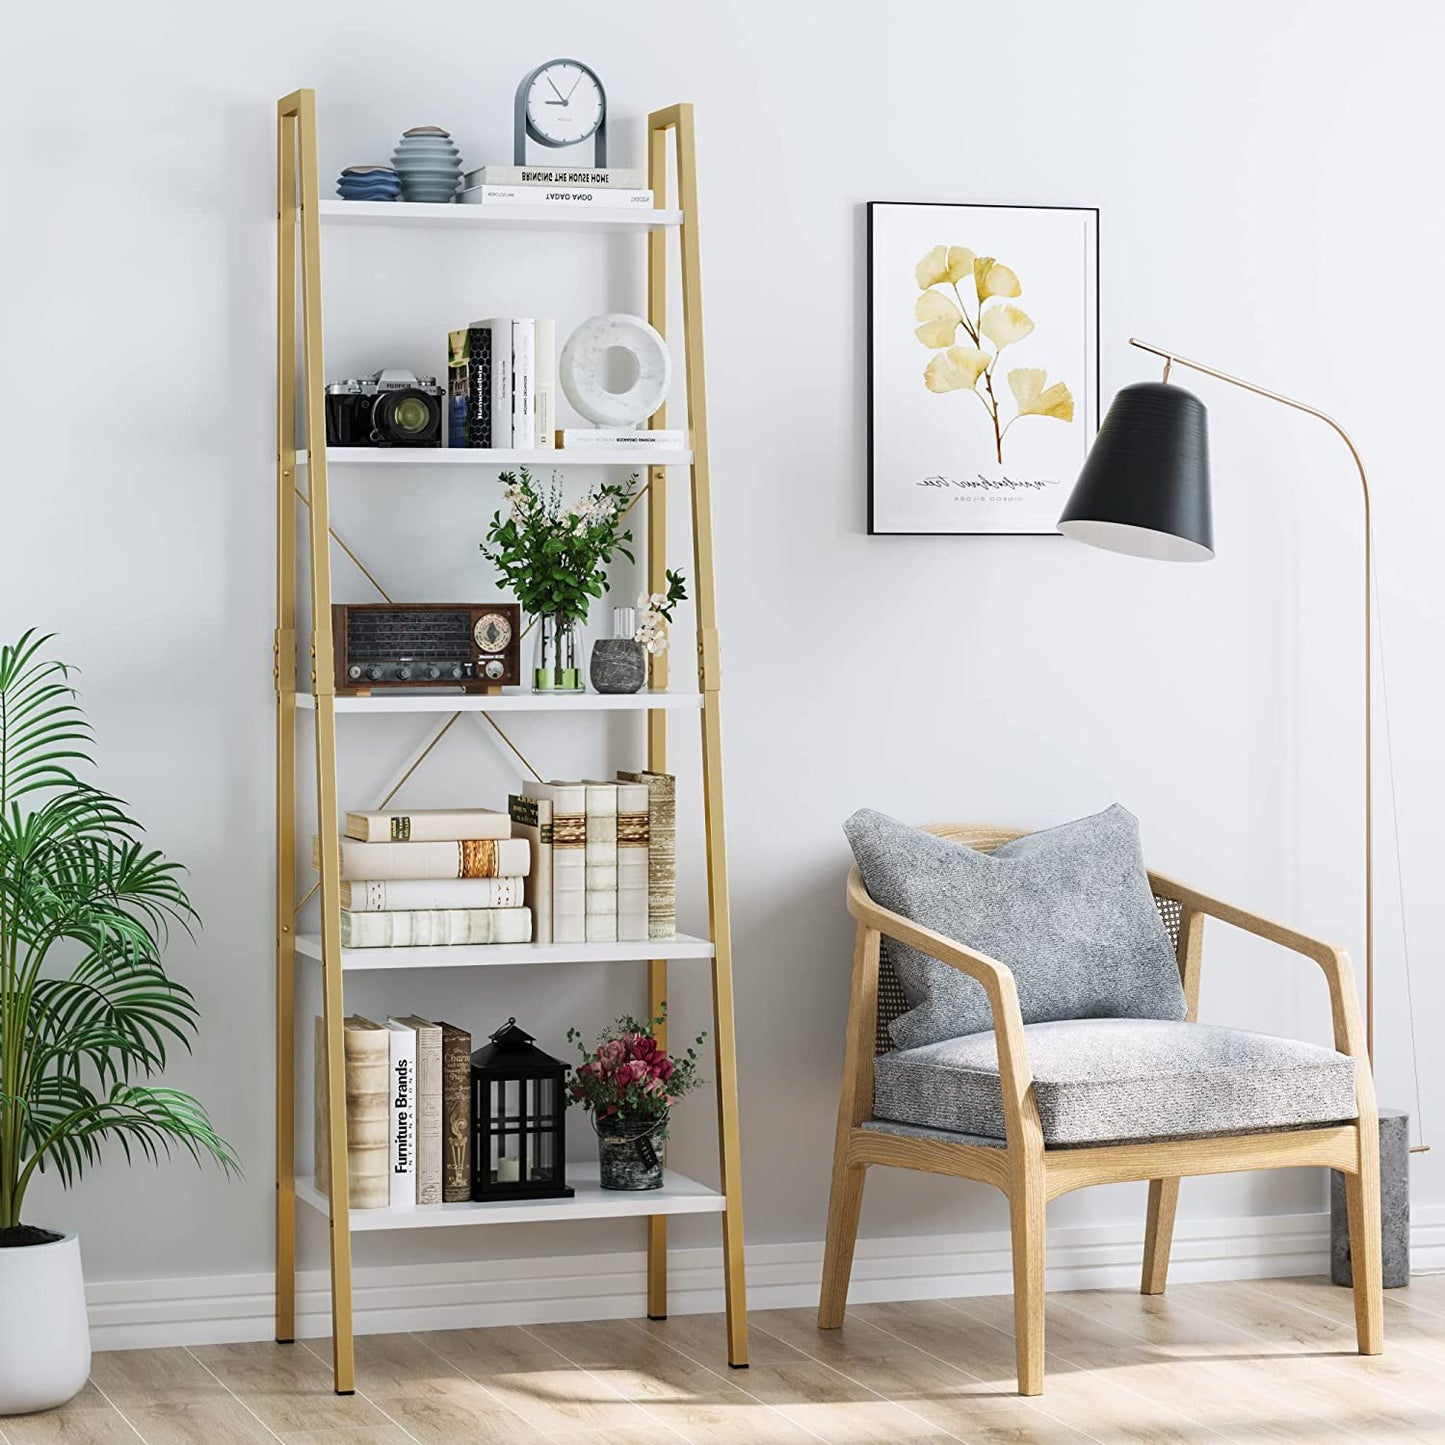 Homfa 5 Tier Gold Bookshelf, Modern Ladder Storage Shelf with Metal Frame for Office Living Room,White and Gold